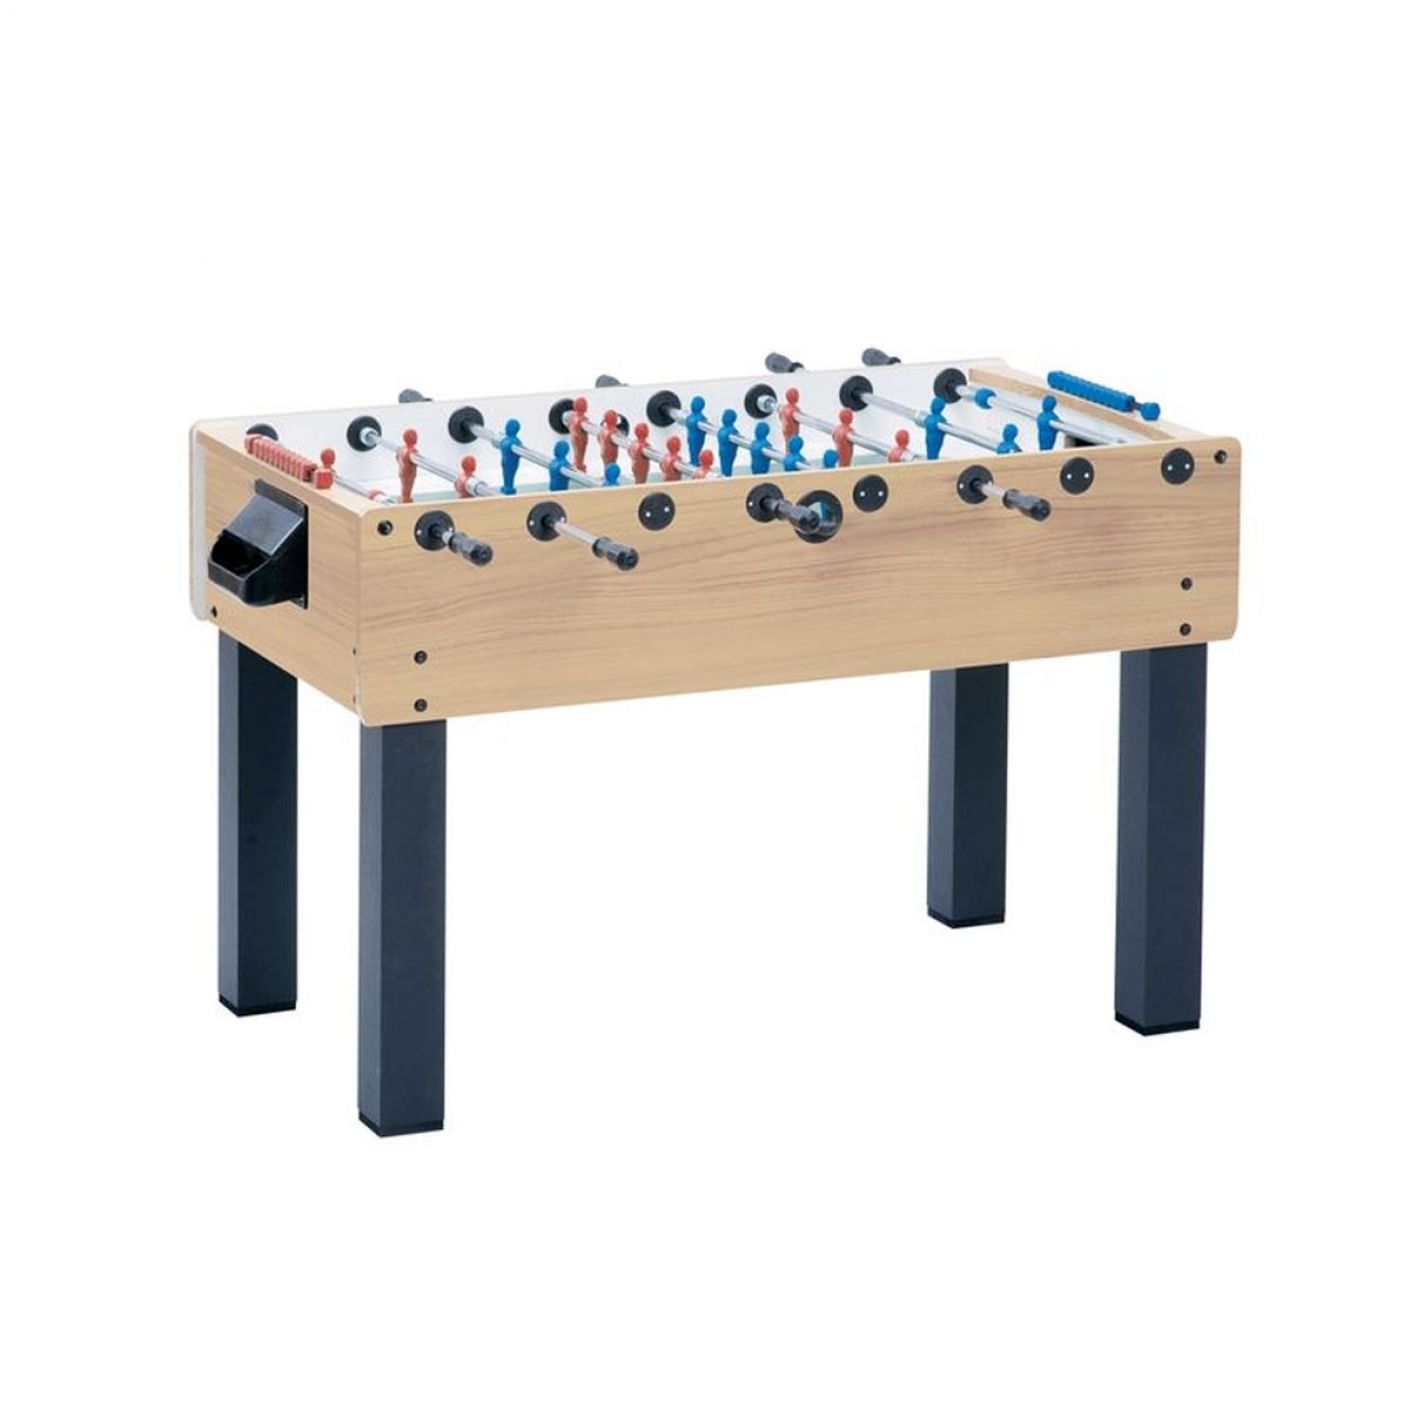 Garlando F-200 table football maple with retracting temples